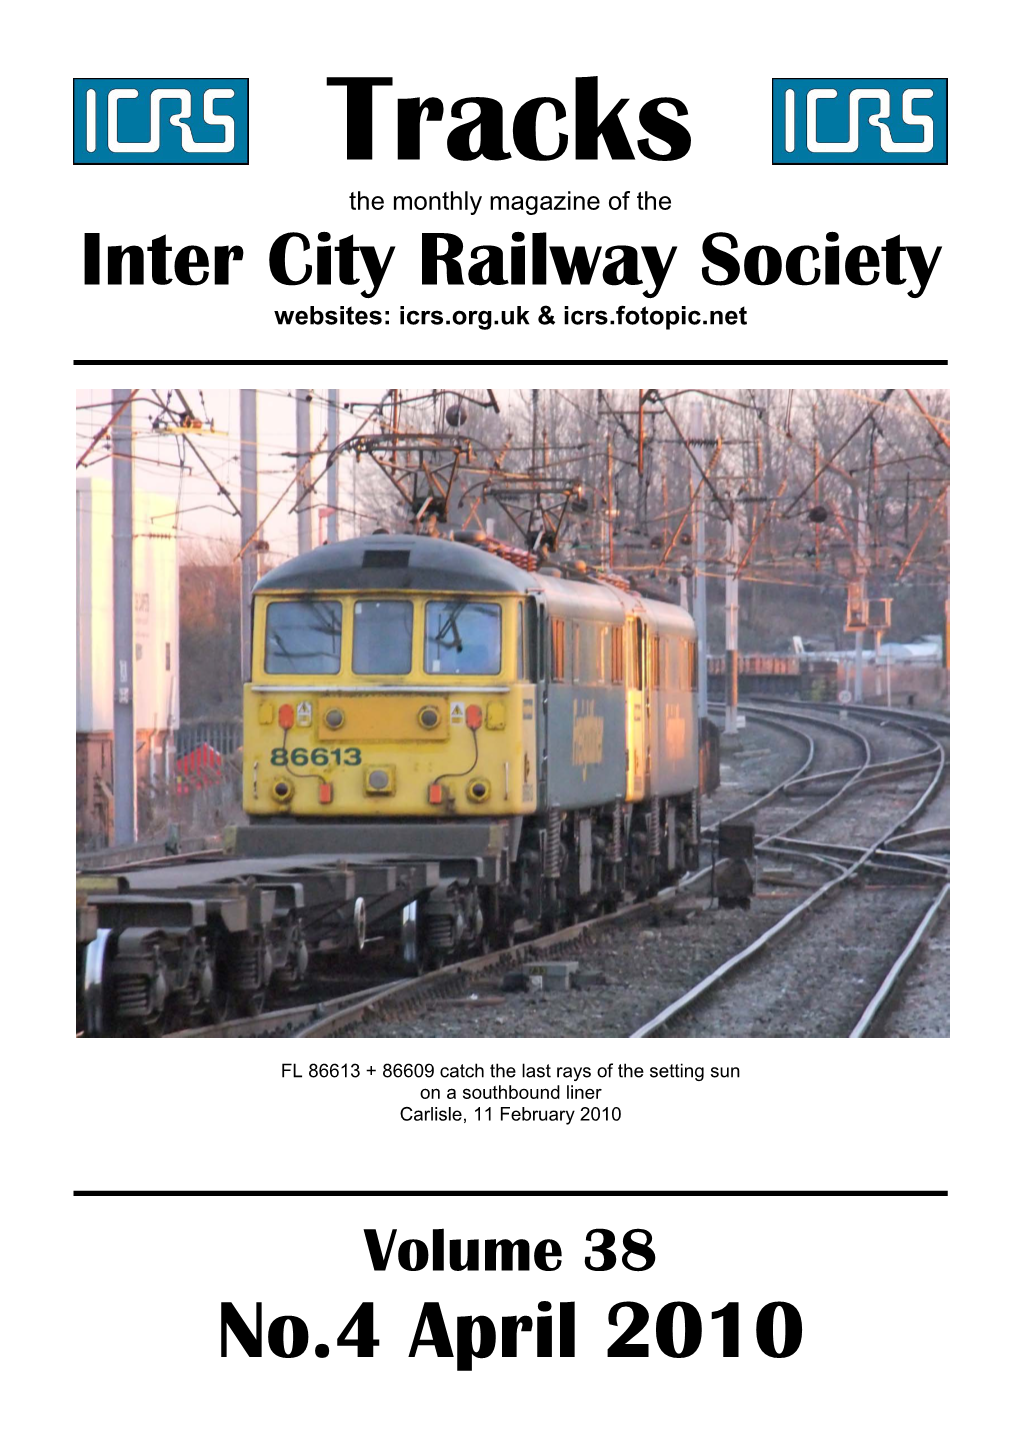 Tracks the Monthly Magazine of the Inter City Railway Society Websites: Icrs.Org.Uk & Icrs.Fotopic.Net